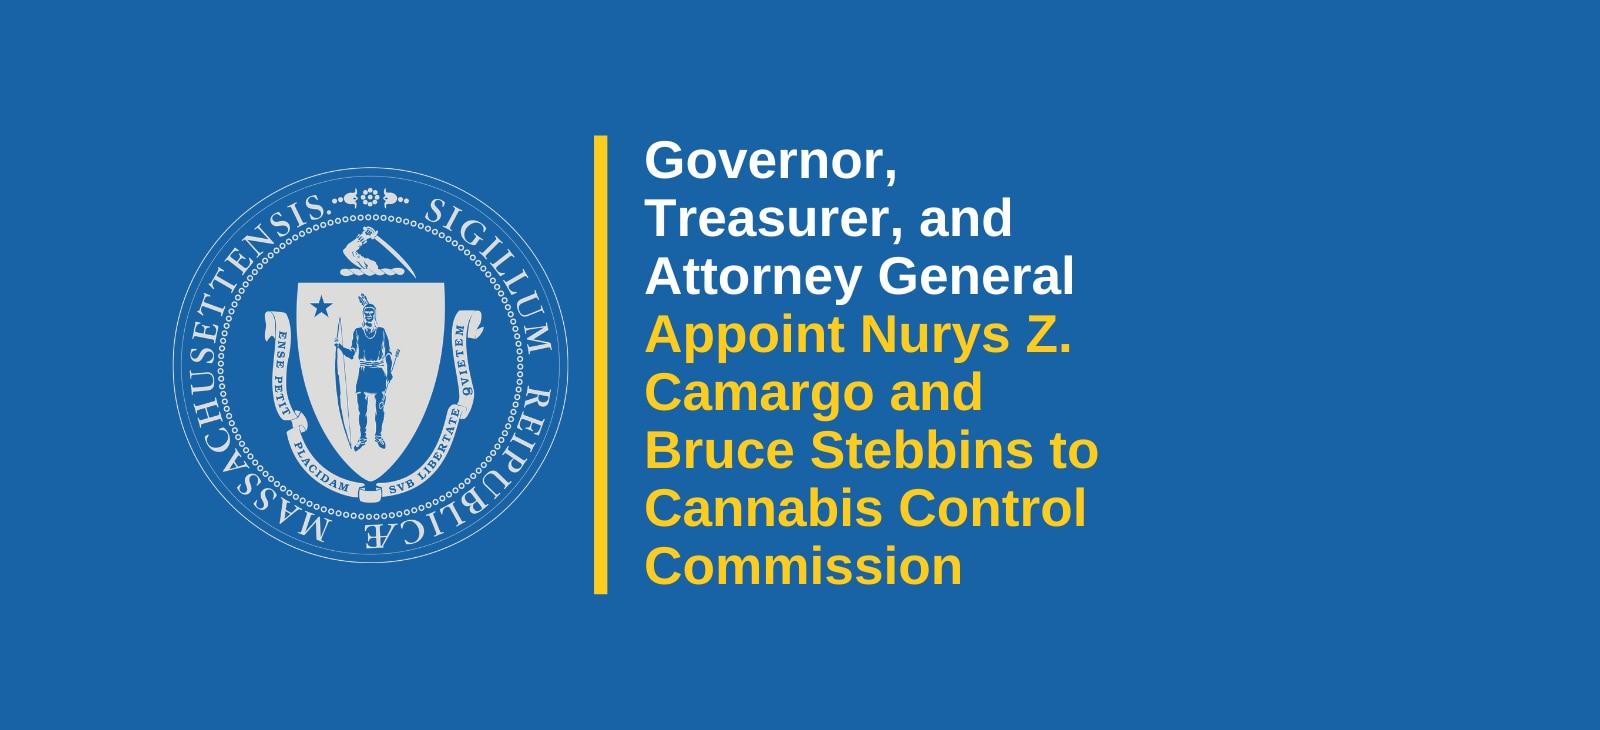 Governor, Treasurer, and Attorney General Appoint Nurys Z. Camargo and Bruce Stebbins to The Cannabis Control Commission